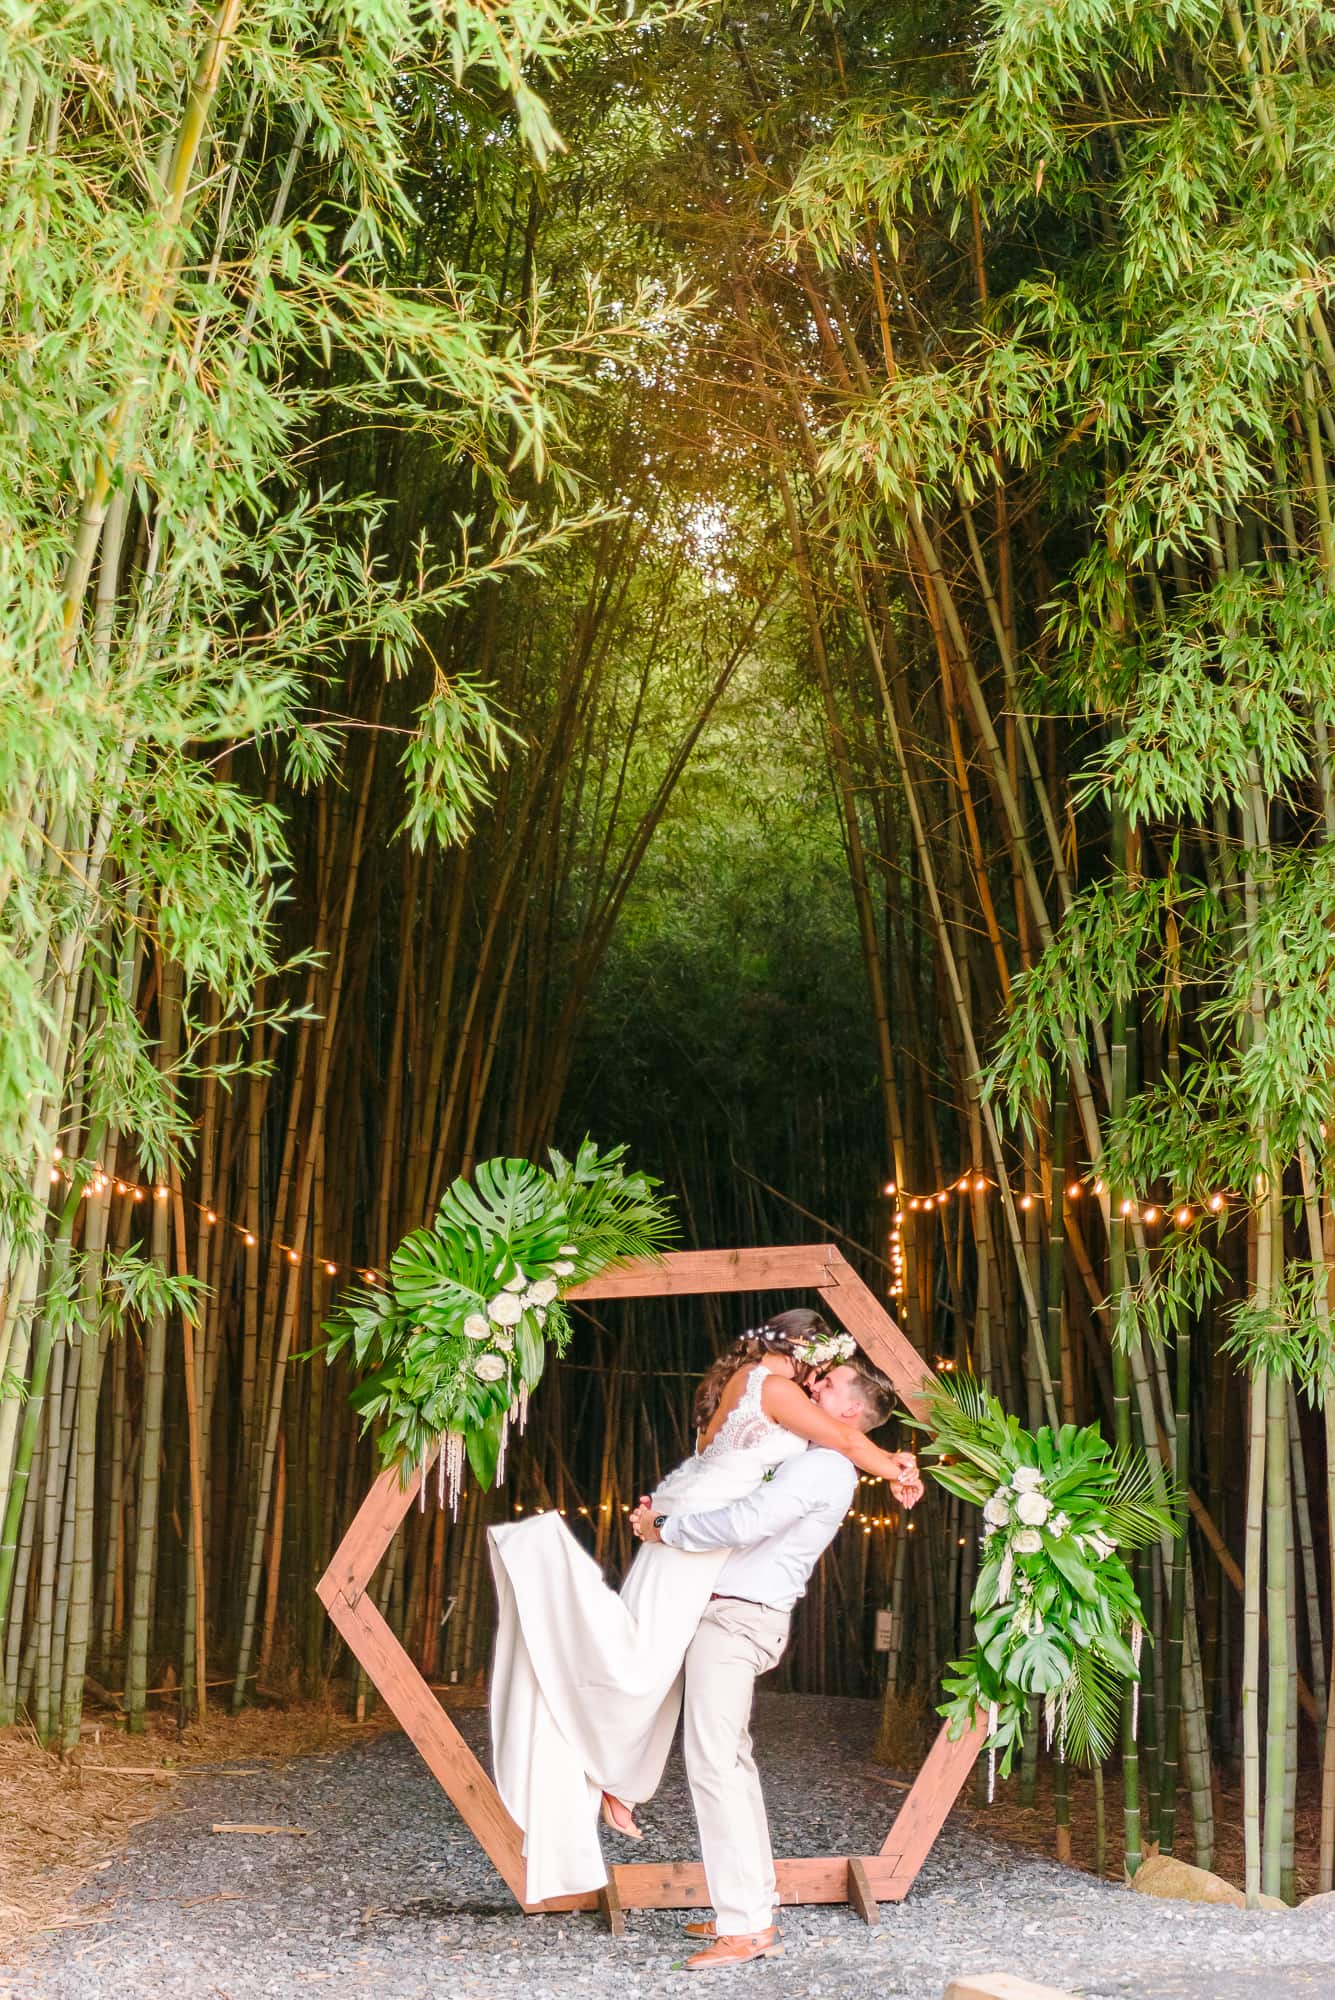 Raycia and Kinston pose in front of the ceremony arch. The Camelot Meadows bamboo forest can be seen behind them.